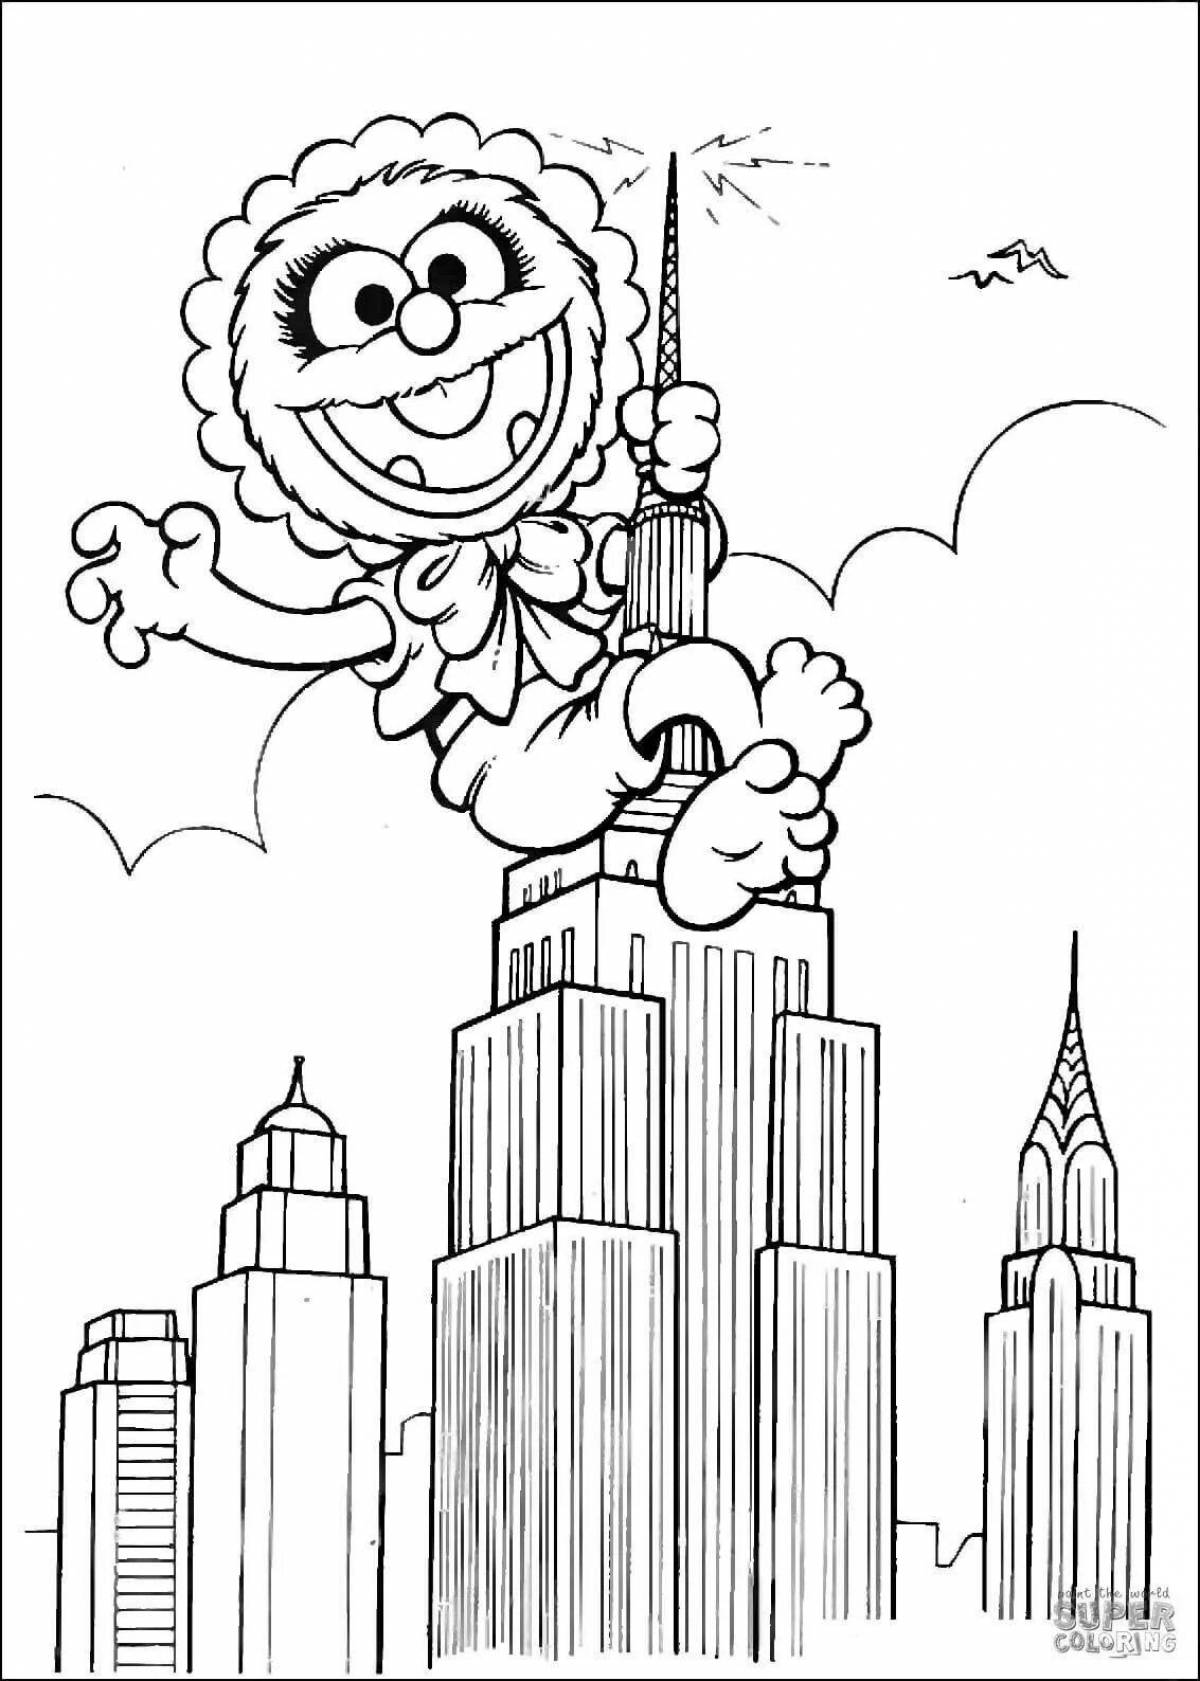 Glorious skyscraper coloring pages for kids